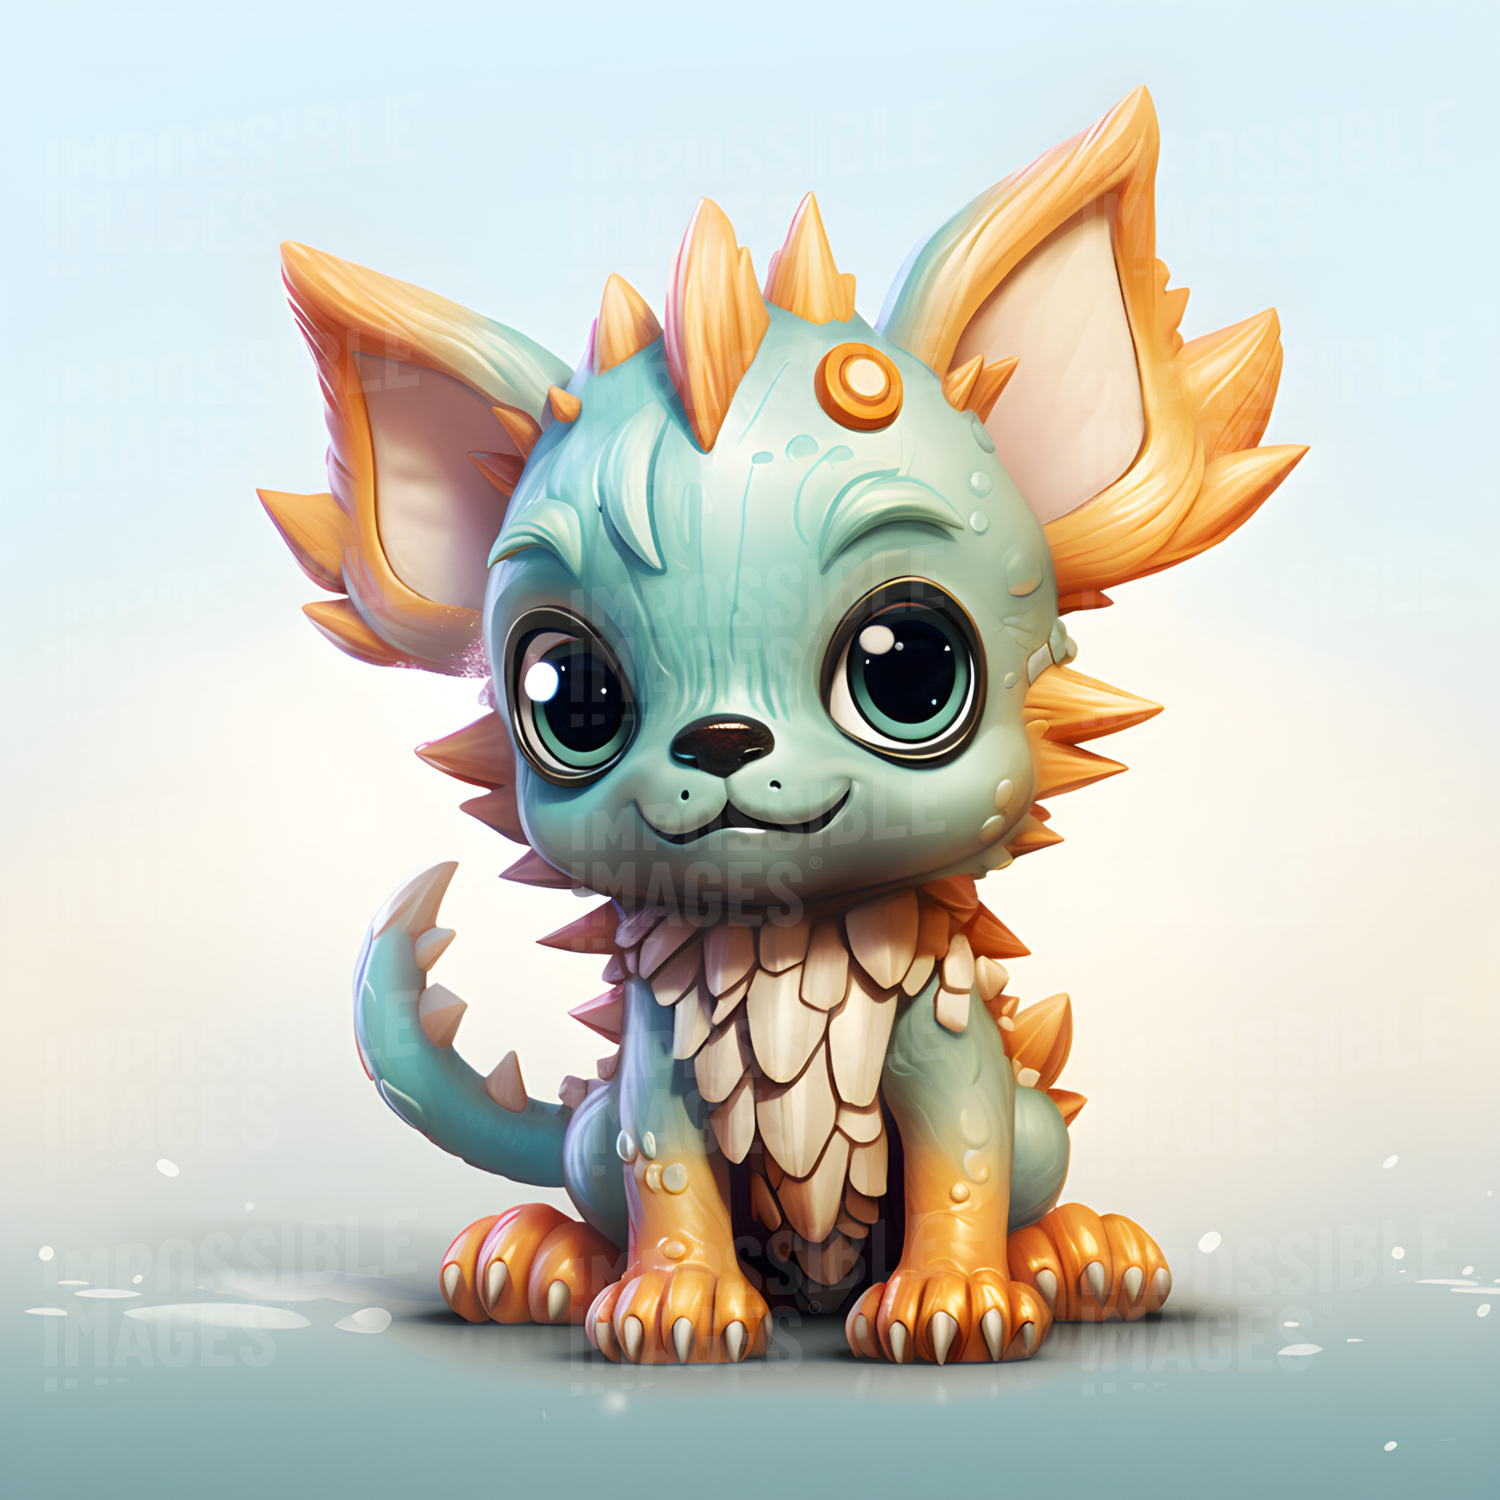 Painting of a cute reptillian kaiju puppy -  A painting of a small, cute reptilian creature resembling a puppy, with a large head and small body.